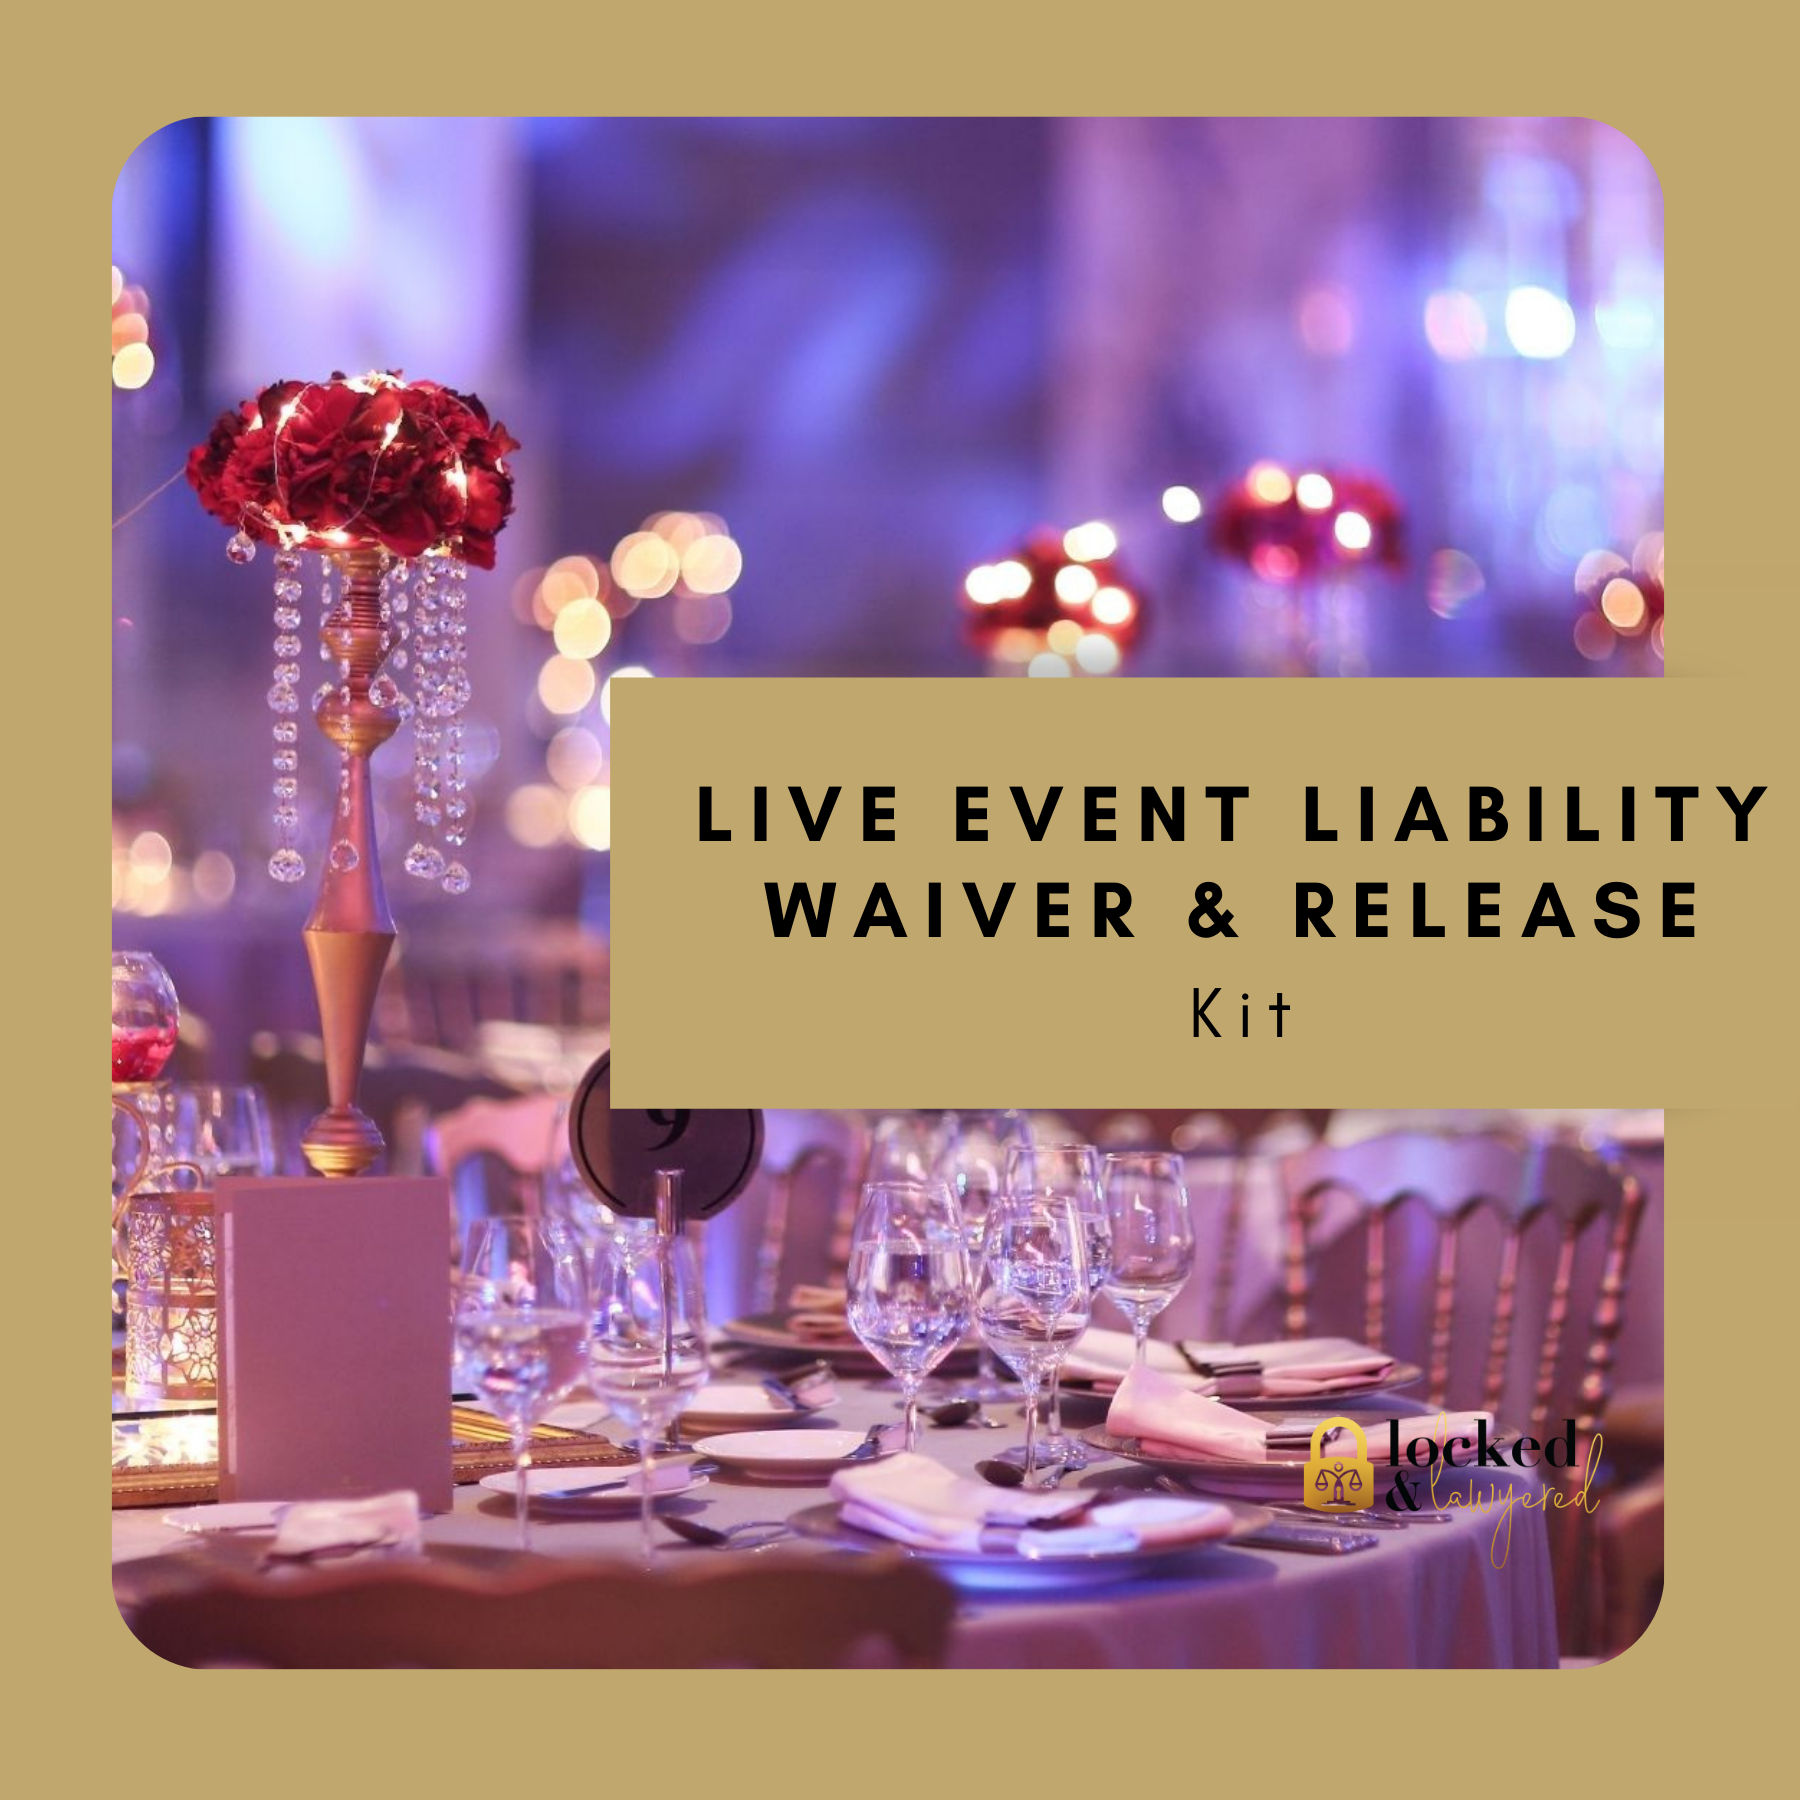 Live Event Liability Waiver & Release Kit